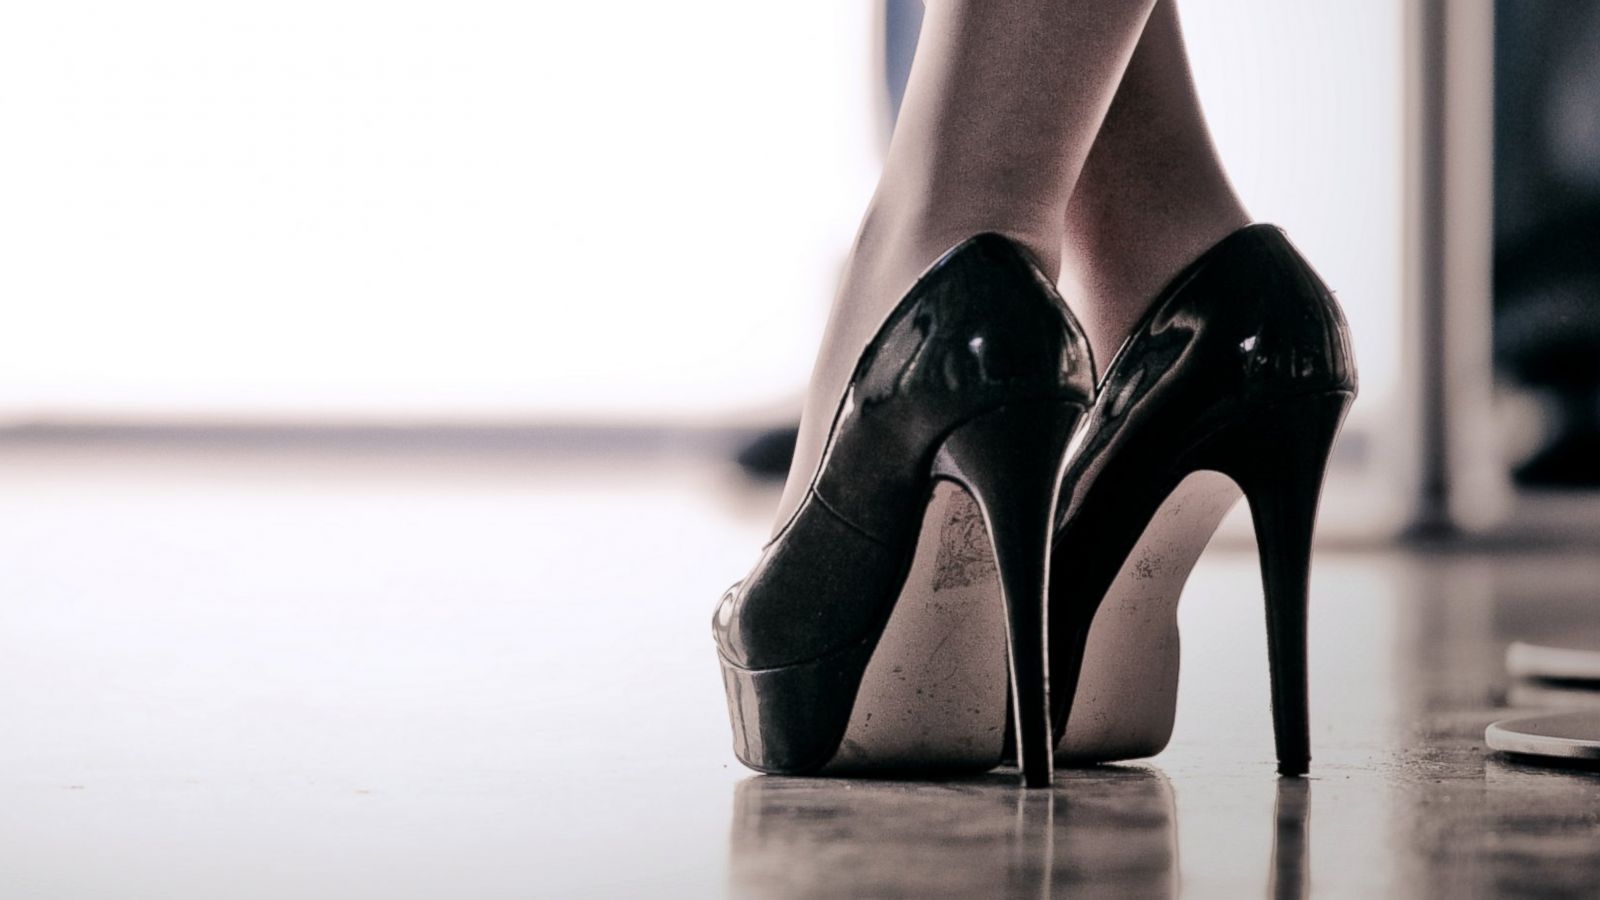 For Me, Body Acceptance Meant Saying Goodbye to High Heels